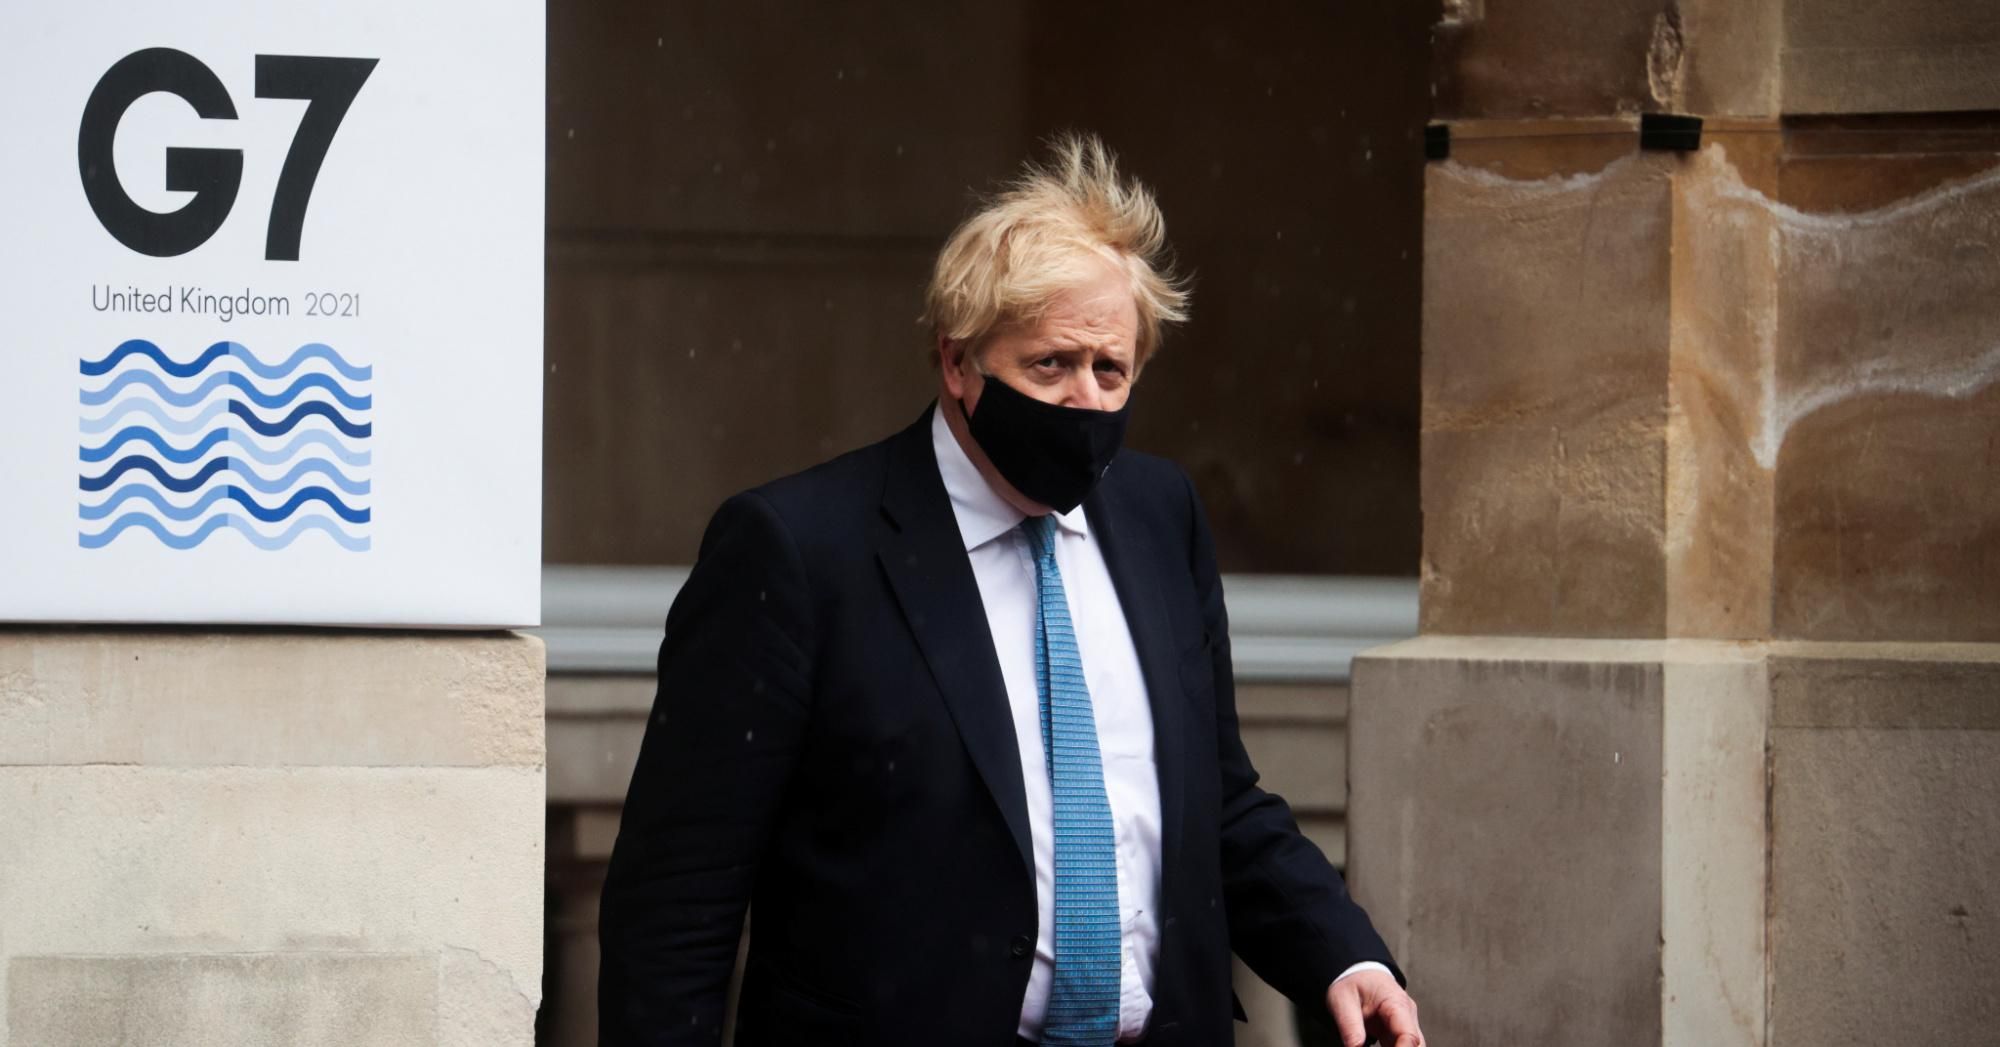 British Prime Minister Boris Johnson departs from the G7 foreign ministers' meeting on May 5, 2021 in London, England.